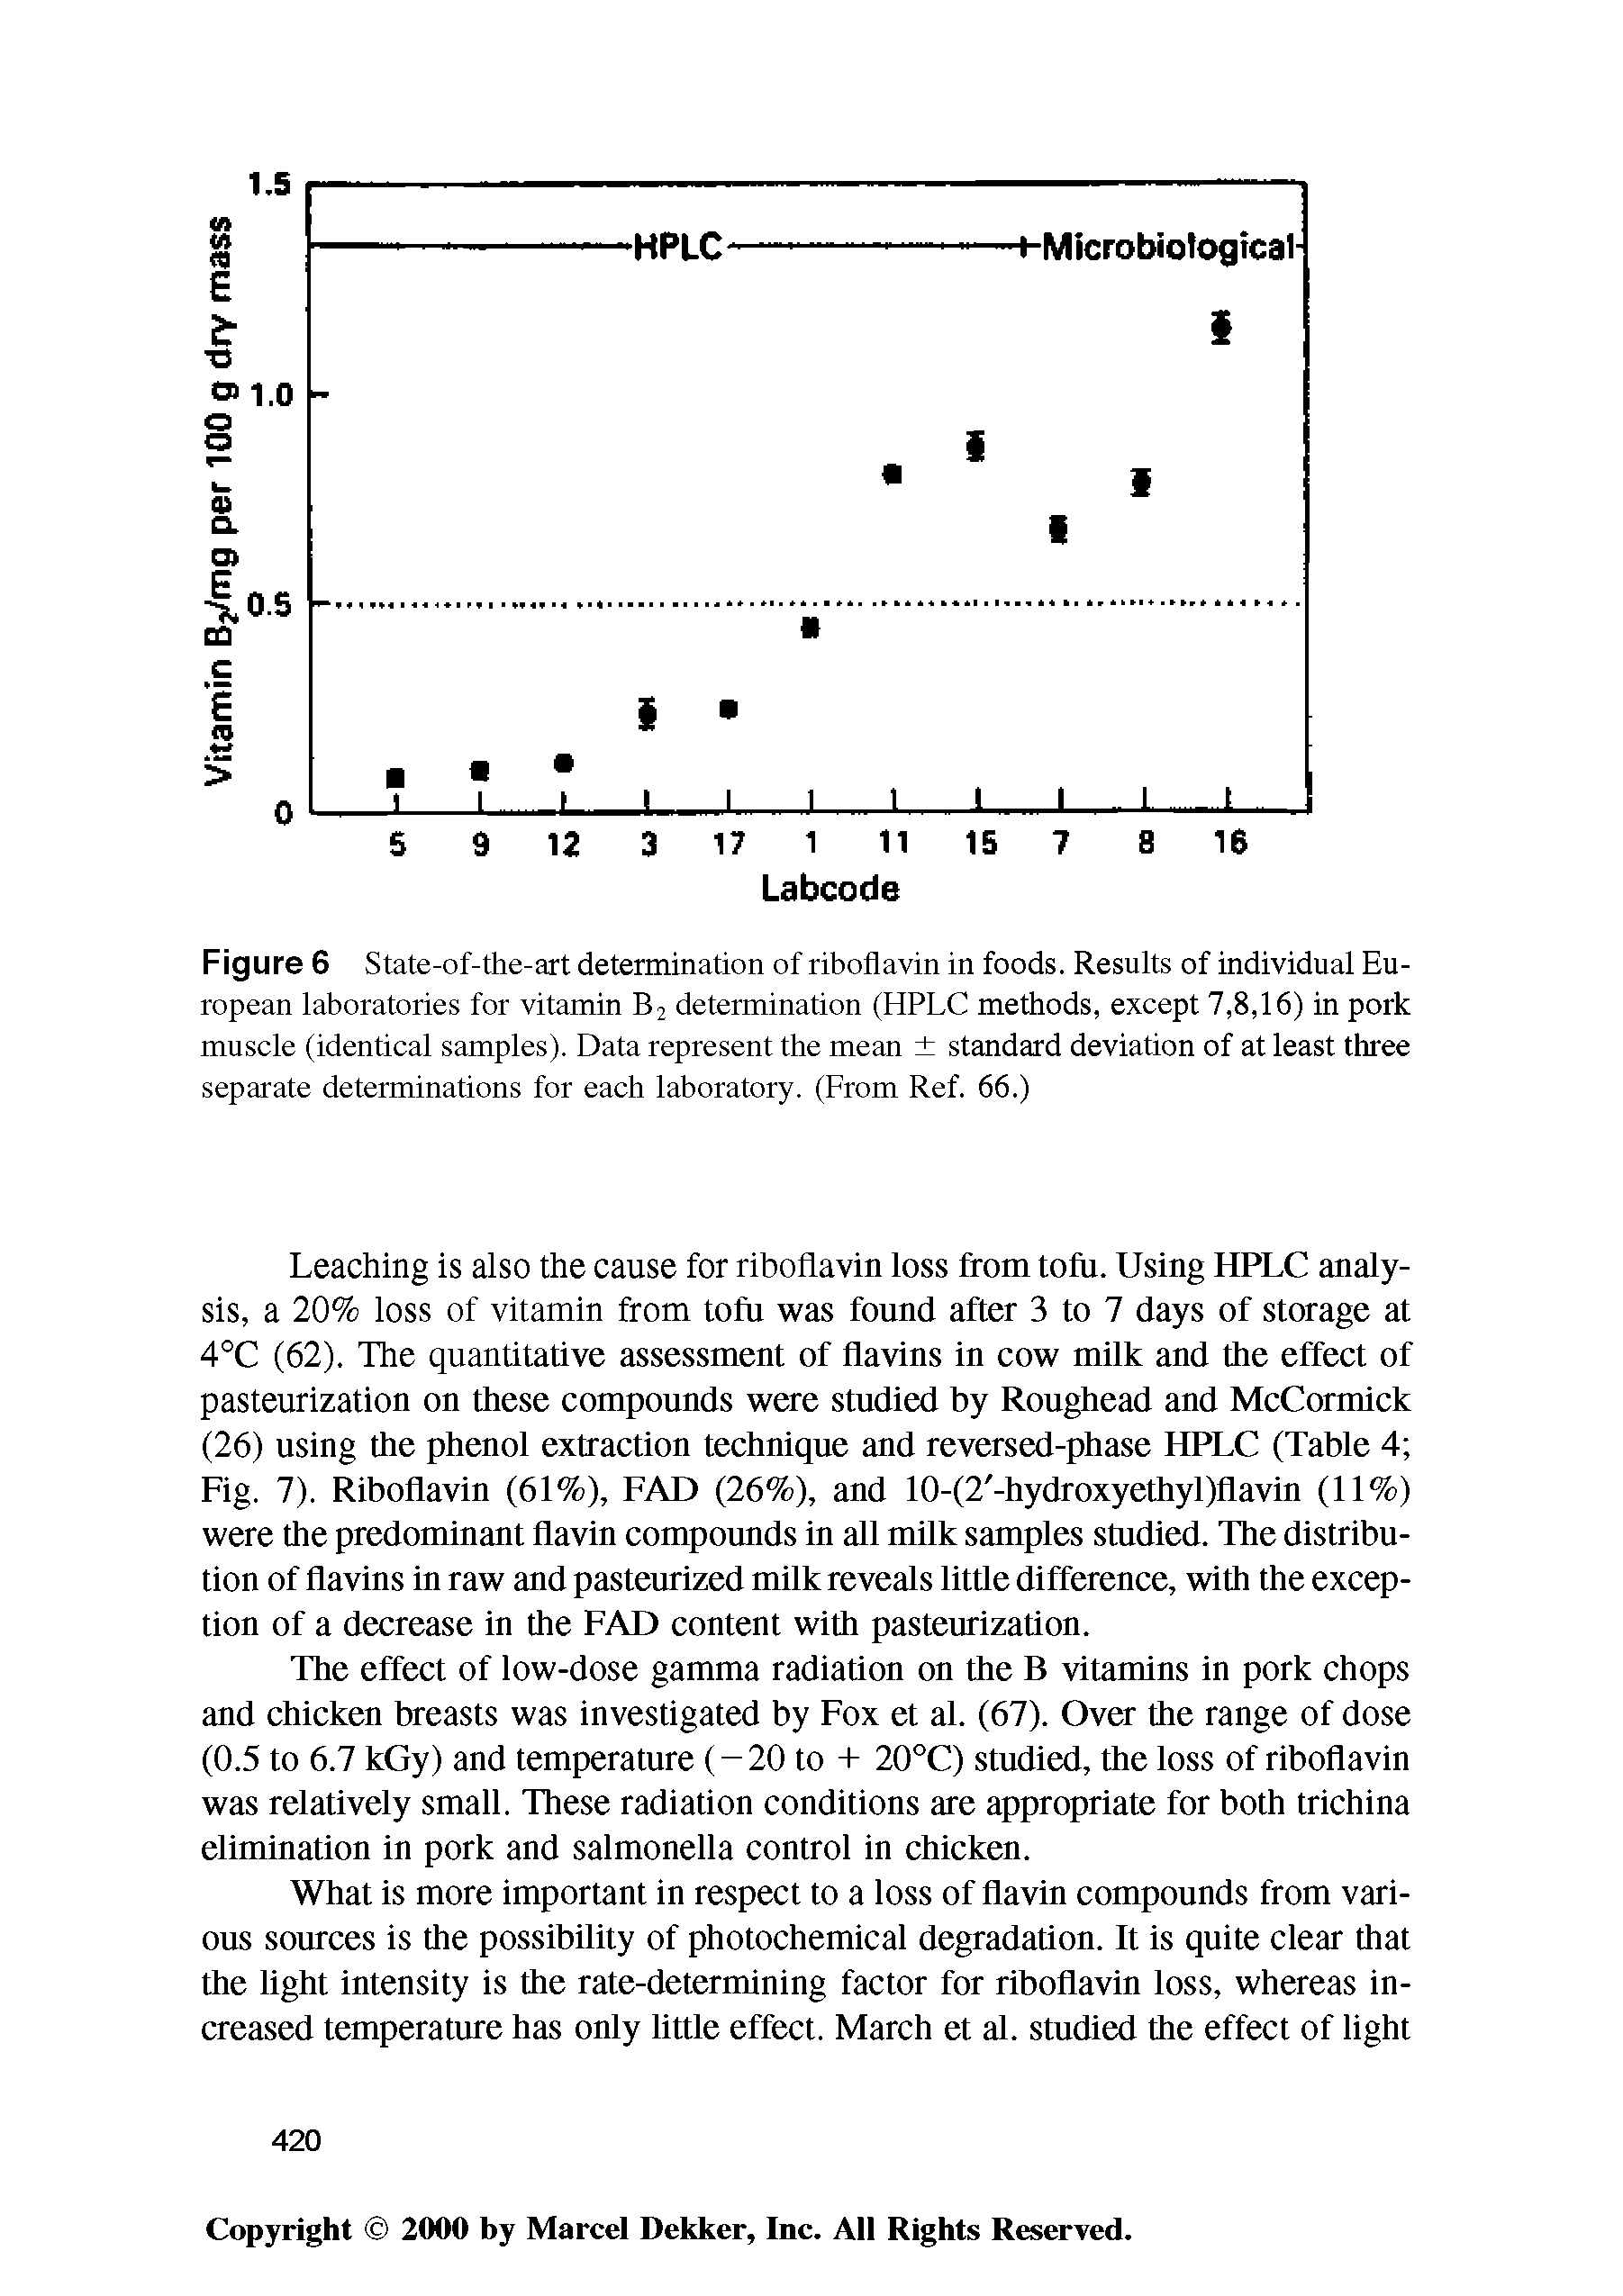 Figure 6 State-of-the-art determination of riboflavin in foods. Results of individual European laboratories for vitamin B2 determination (HPLC methods, except 7,8,16) in pork muscle (identical samples). Data represent the mean standard deviation of at least three separate determinations for each laboratory. (From Ref. 66.)...